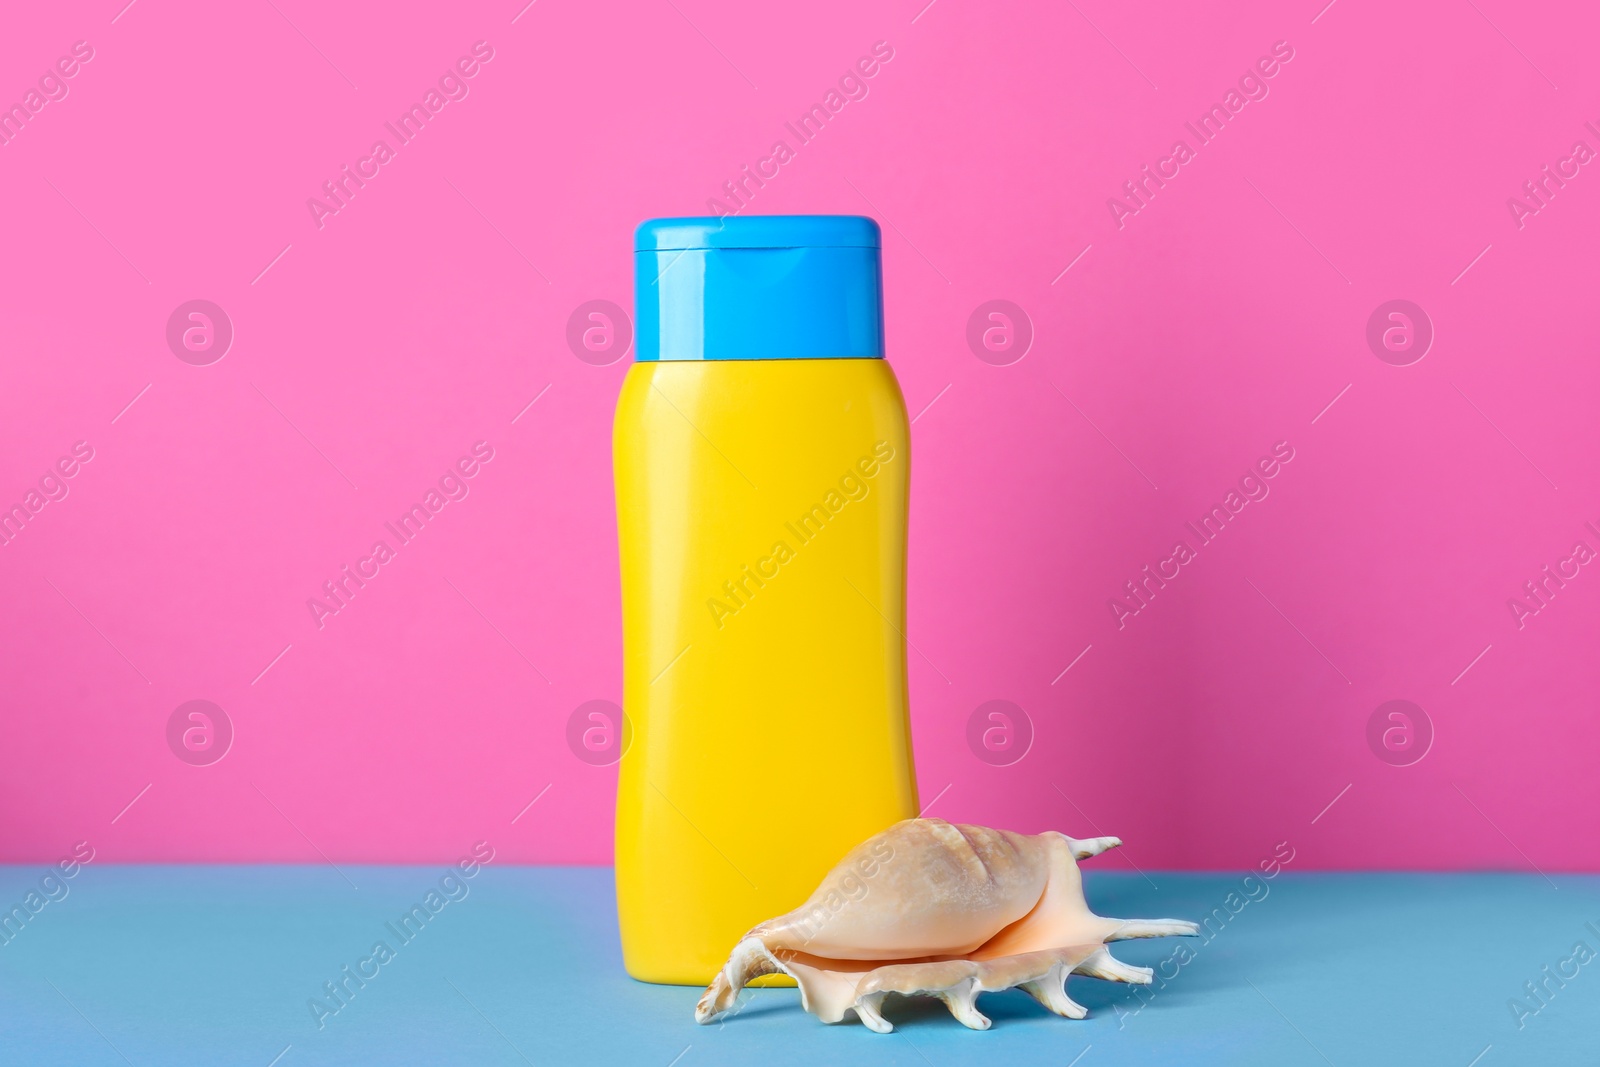 Photo of Suntan product and seashell on color background